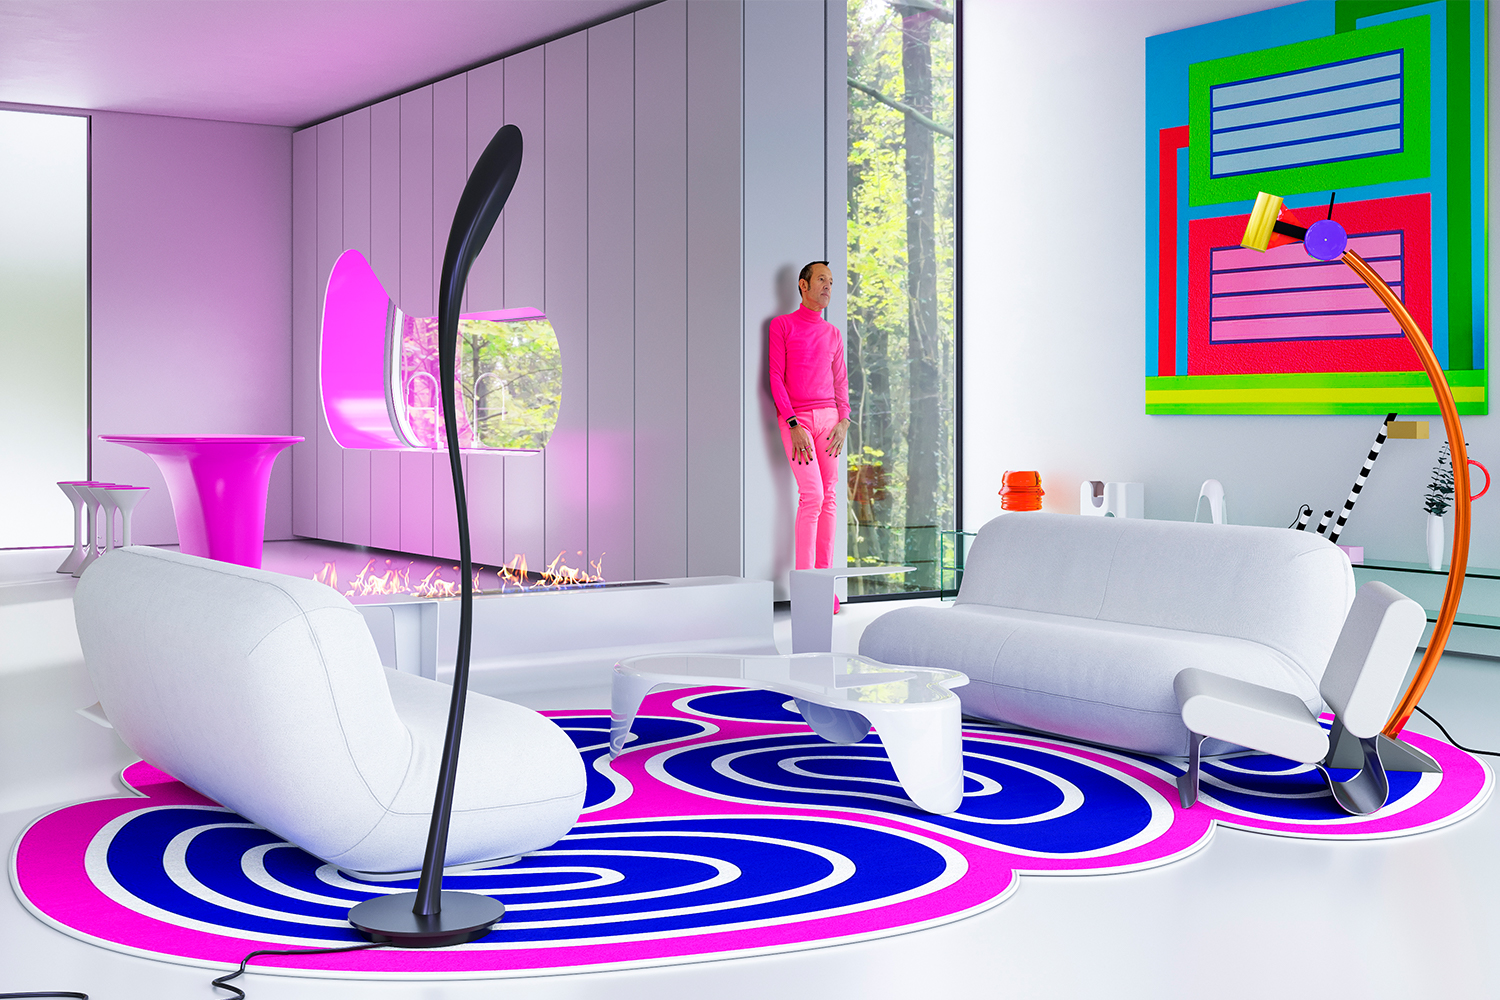 A rendering of the interior of Karim Rashid's KR House, with the designer seen in the middle of the living room